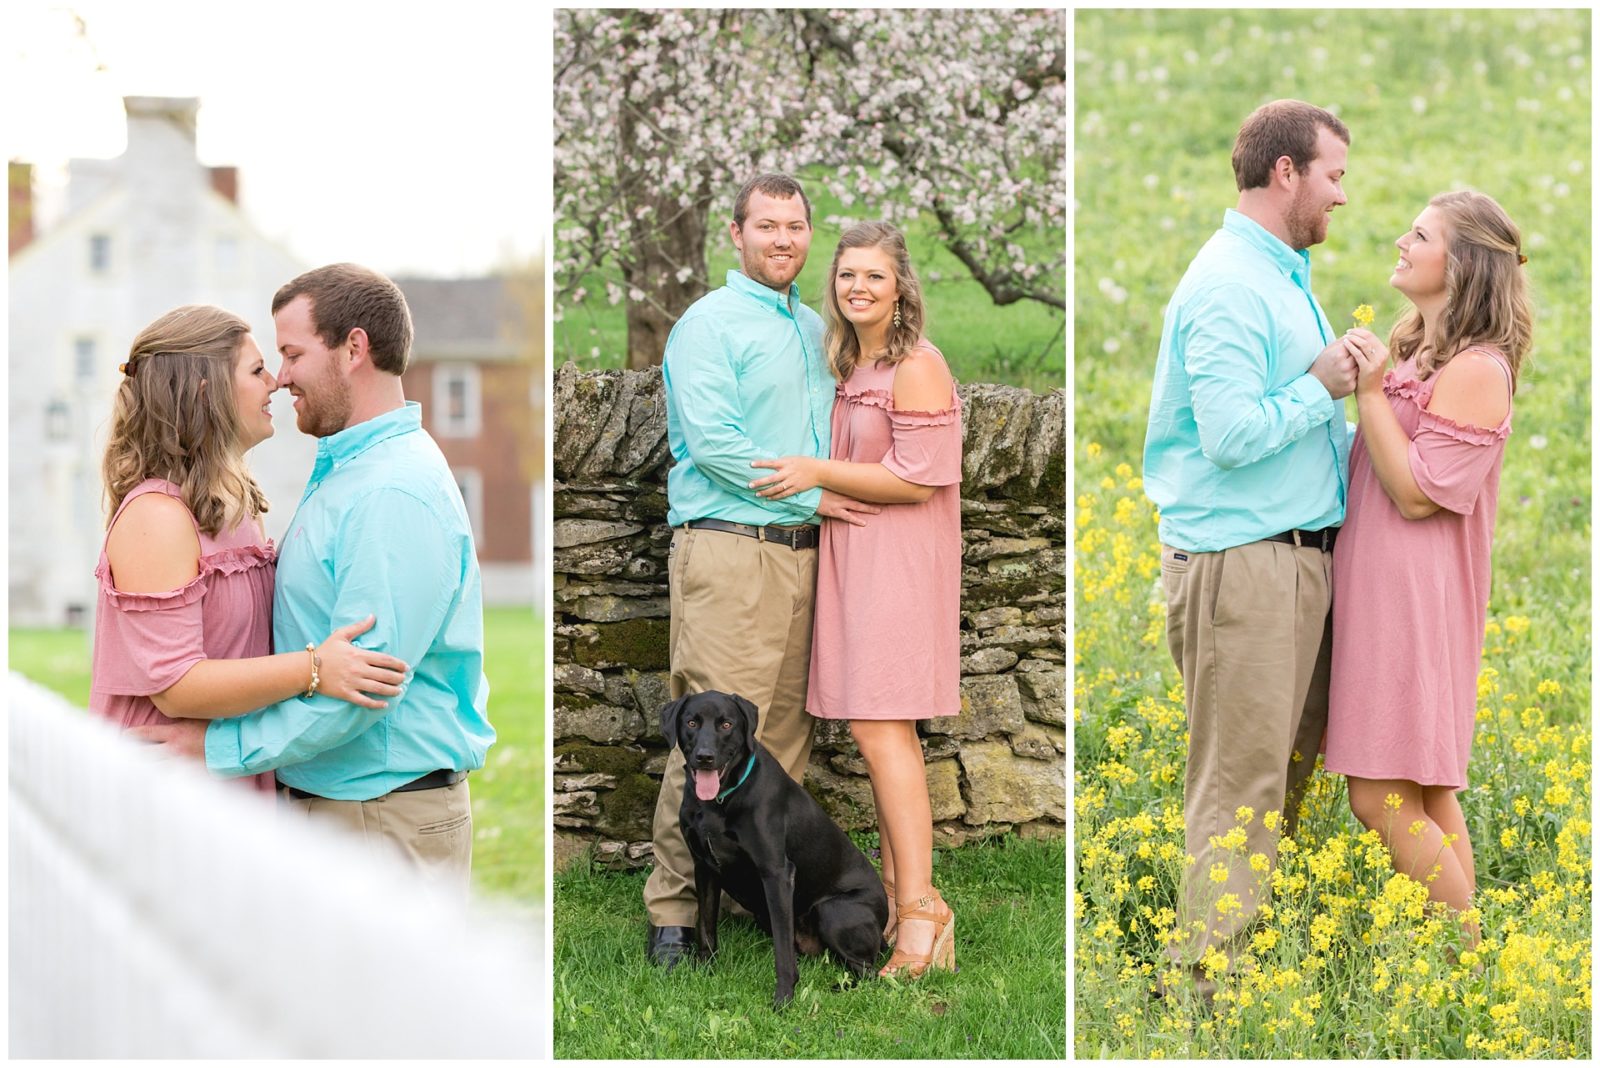 Spring Engagement Session with a dog at Shaker Village in Harrodsburg, Kentucky.